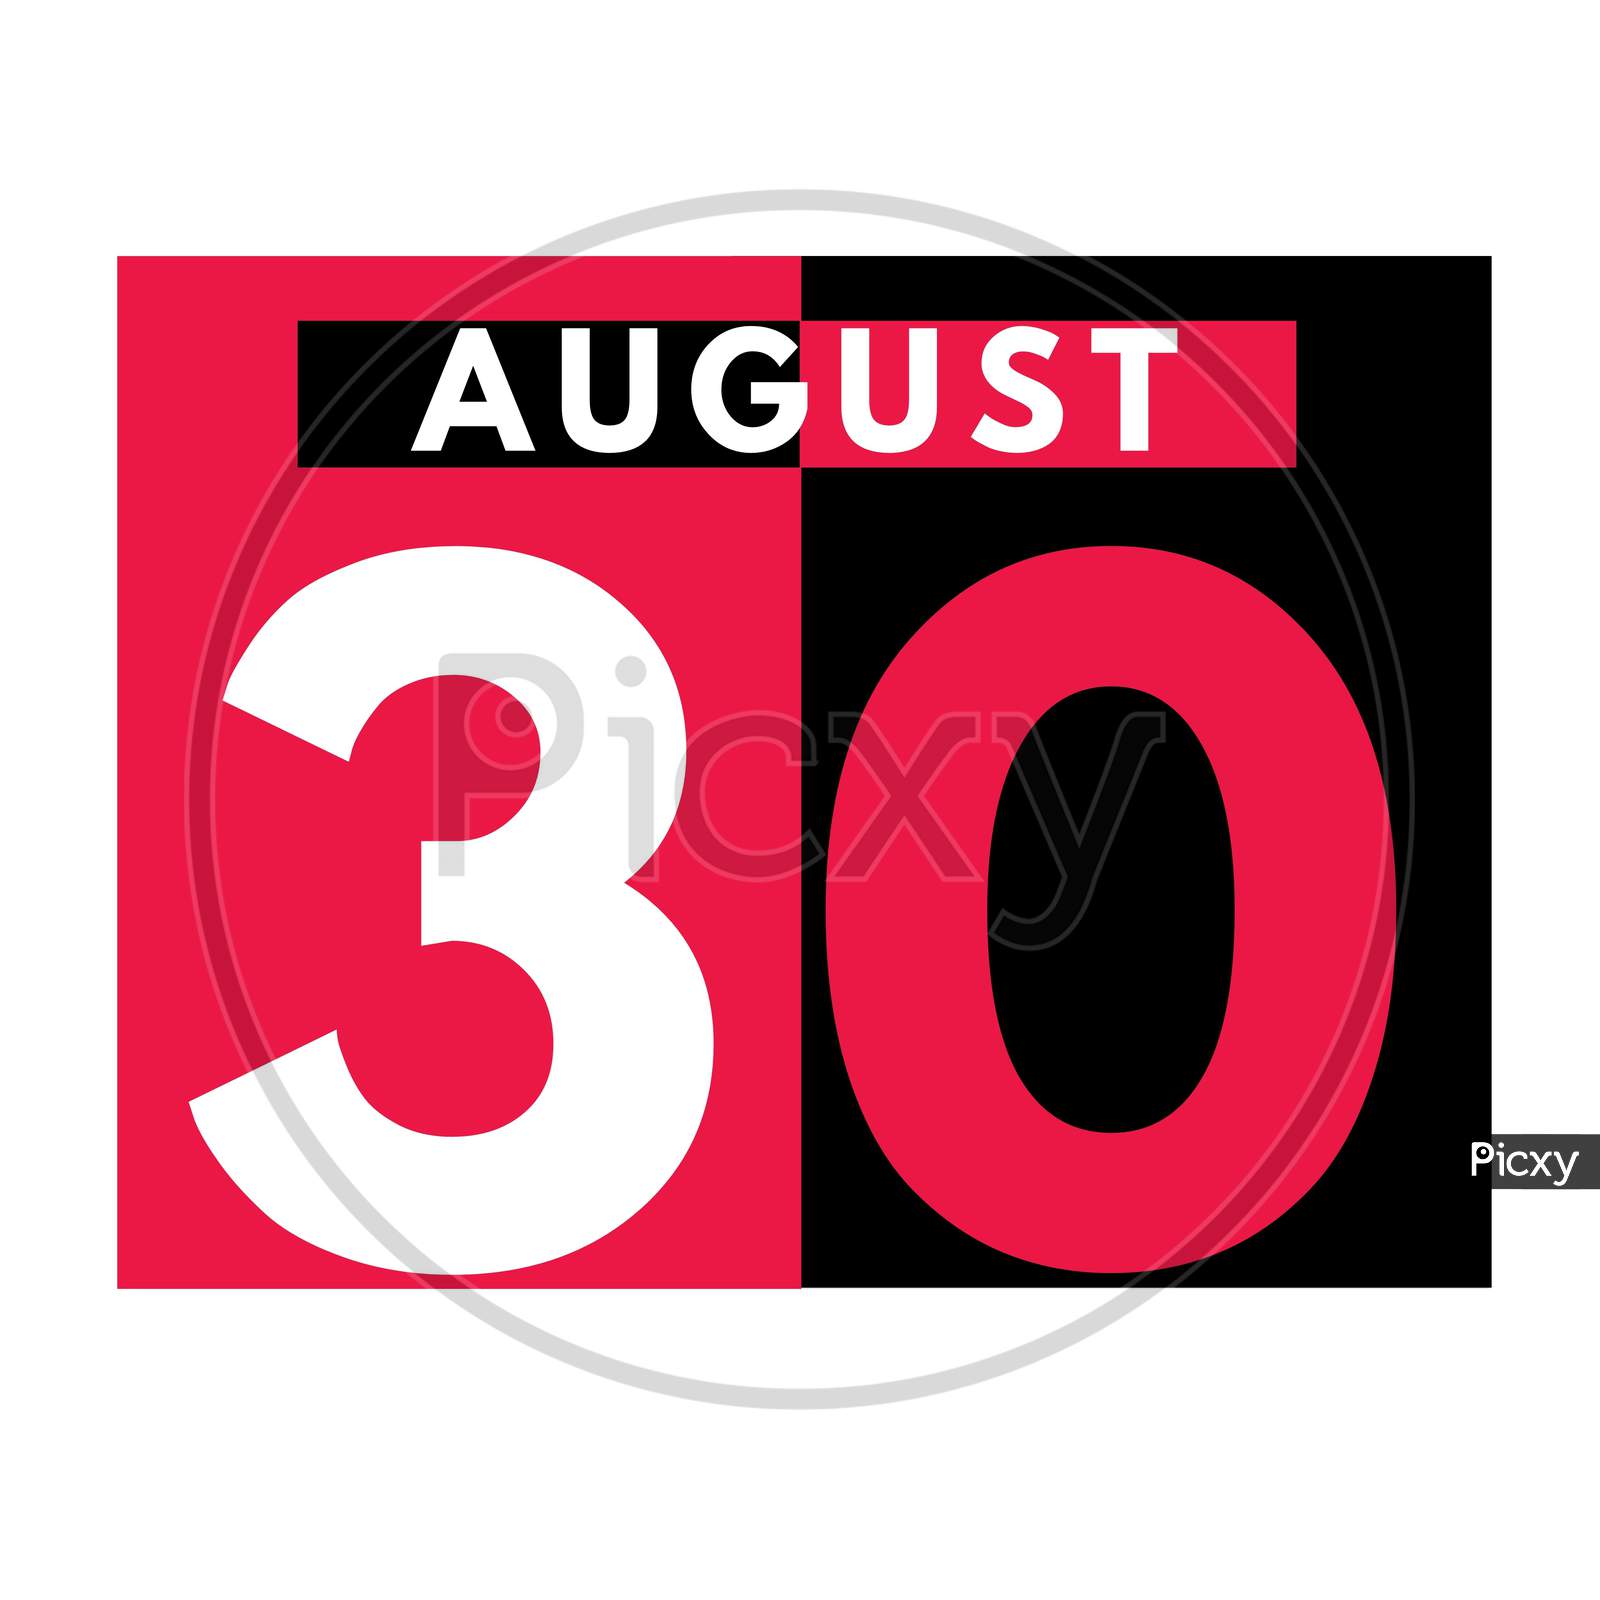 August 30 . Modern Daily Calendar Icon .Date ,Day, Month .Calendar For The Month Of August